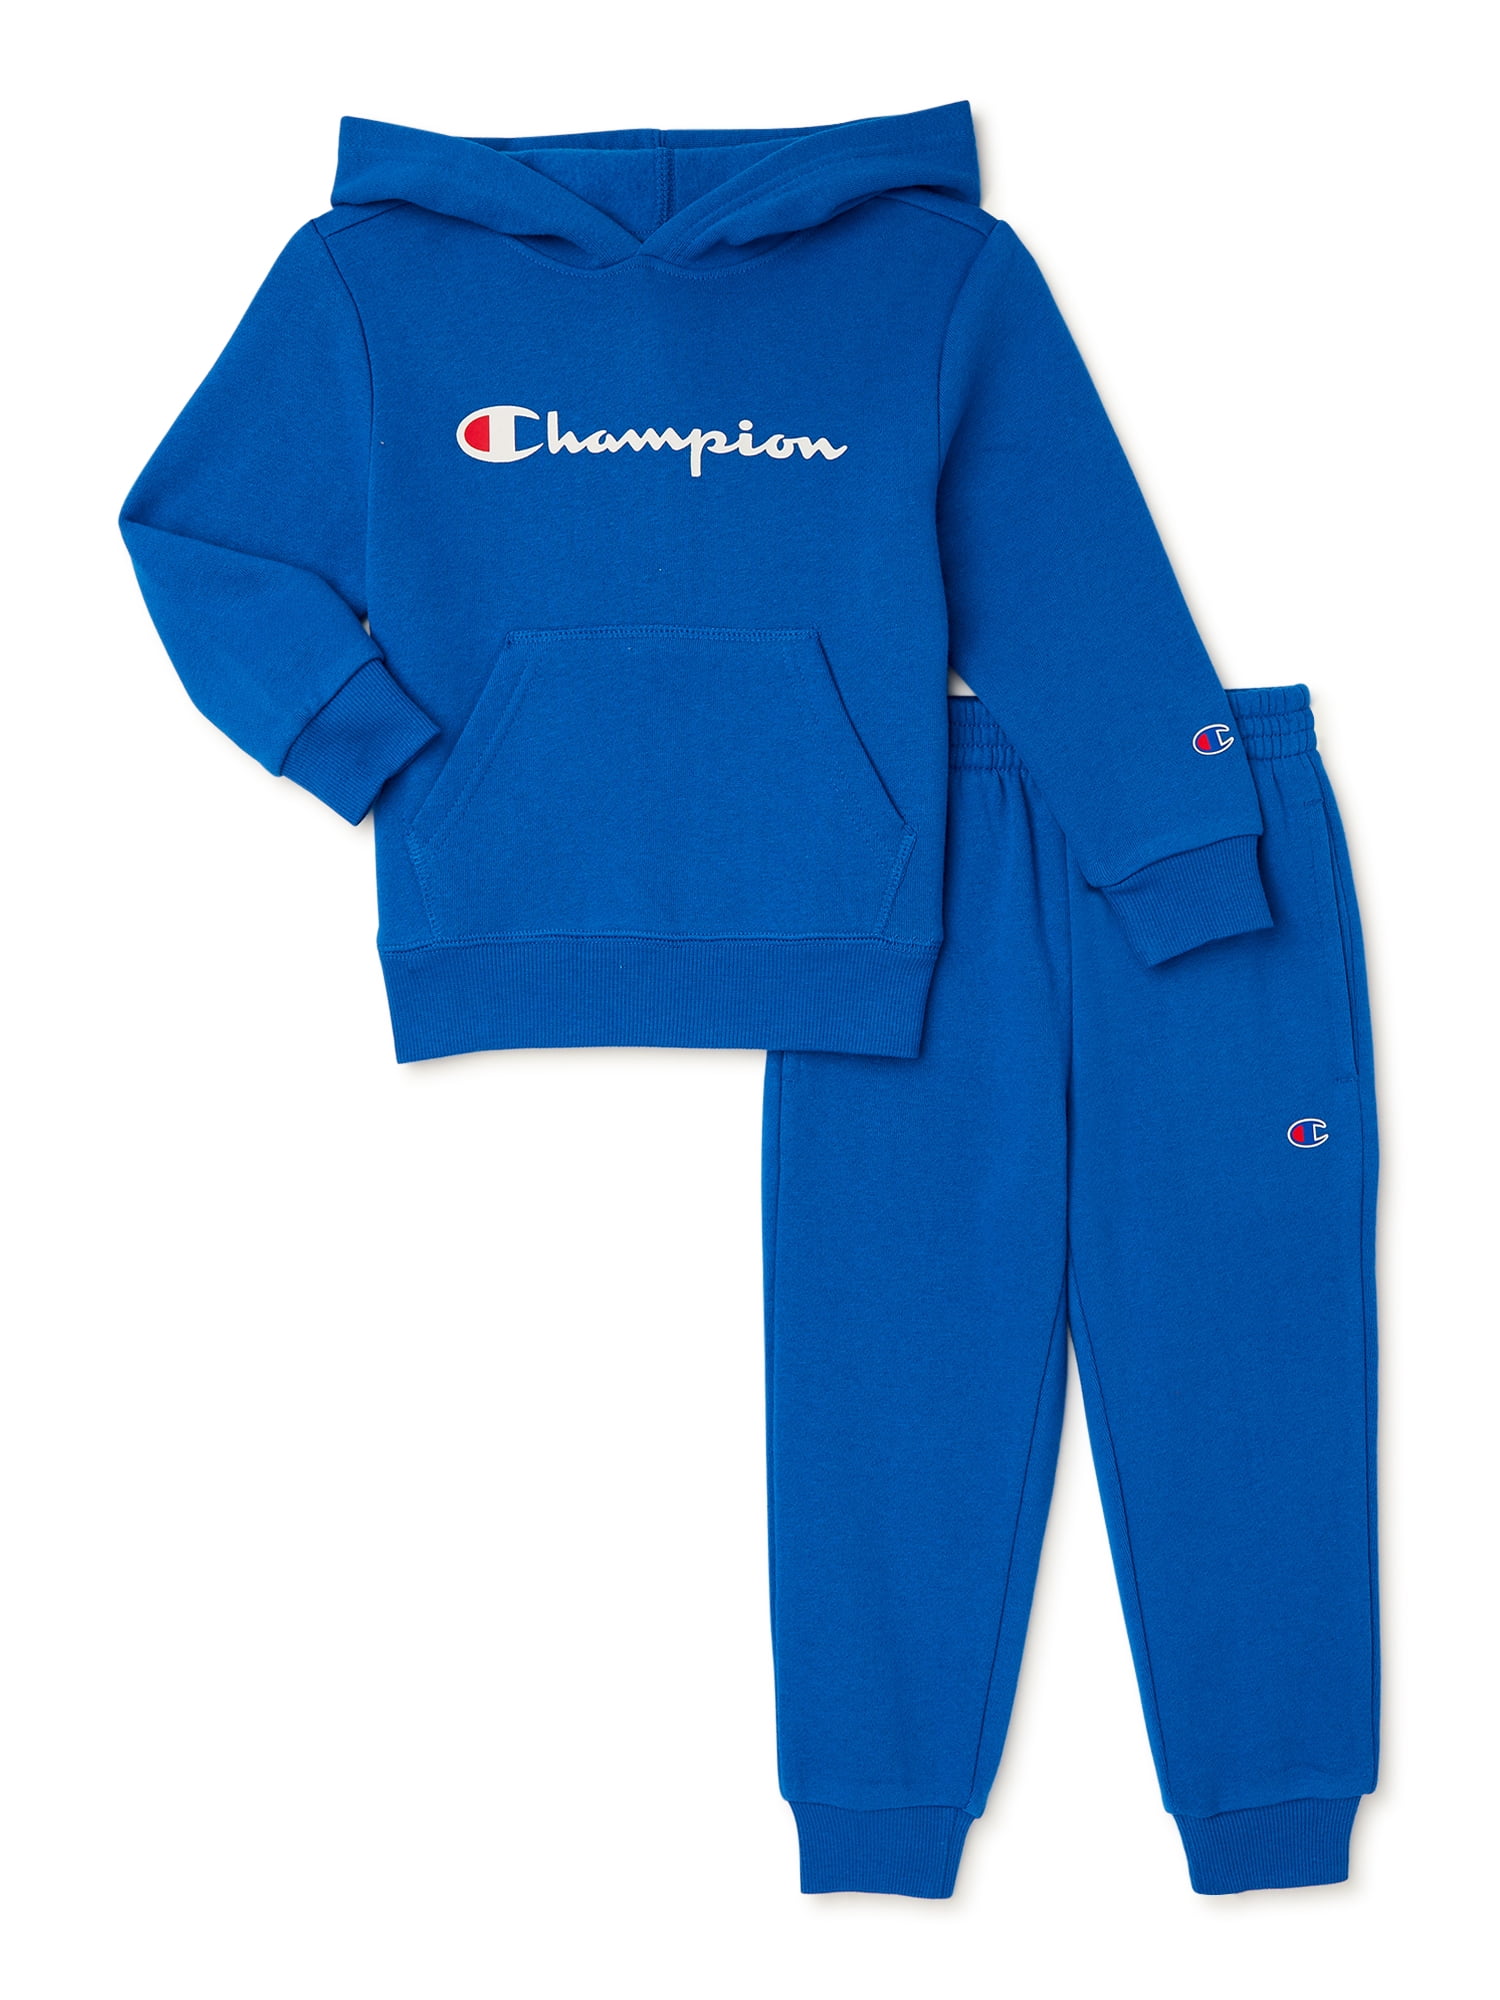 Champion Toddler Boys\' Matching 2-Piece, Jogger 2T-4T Size and Hoodie Set